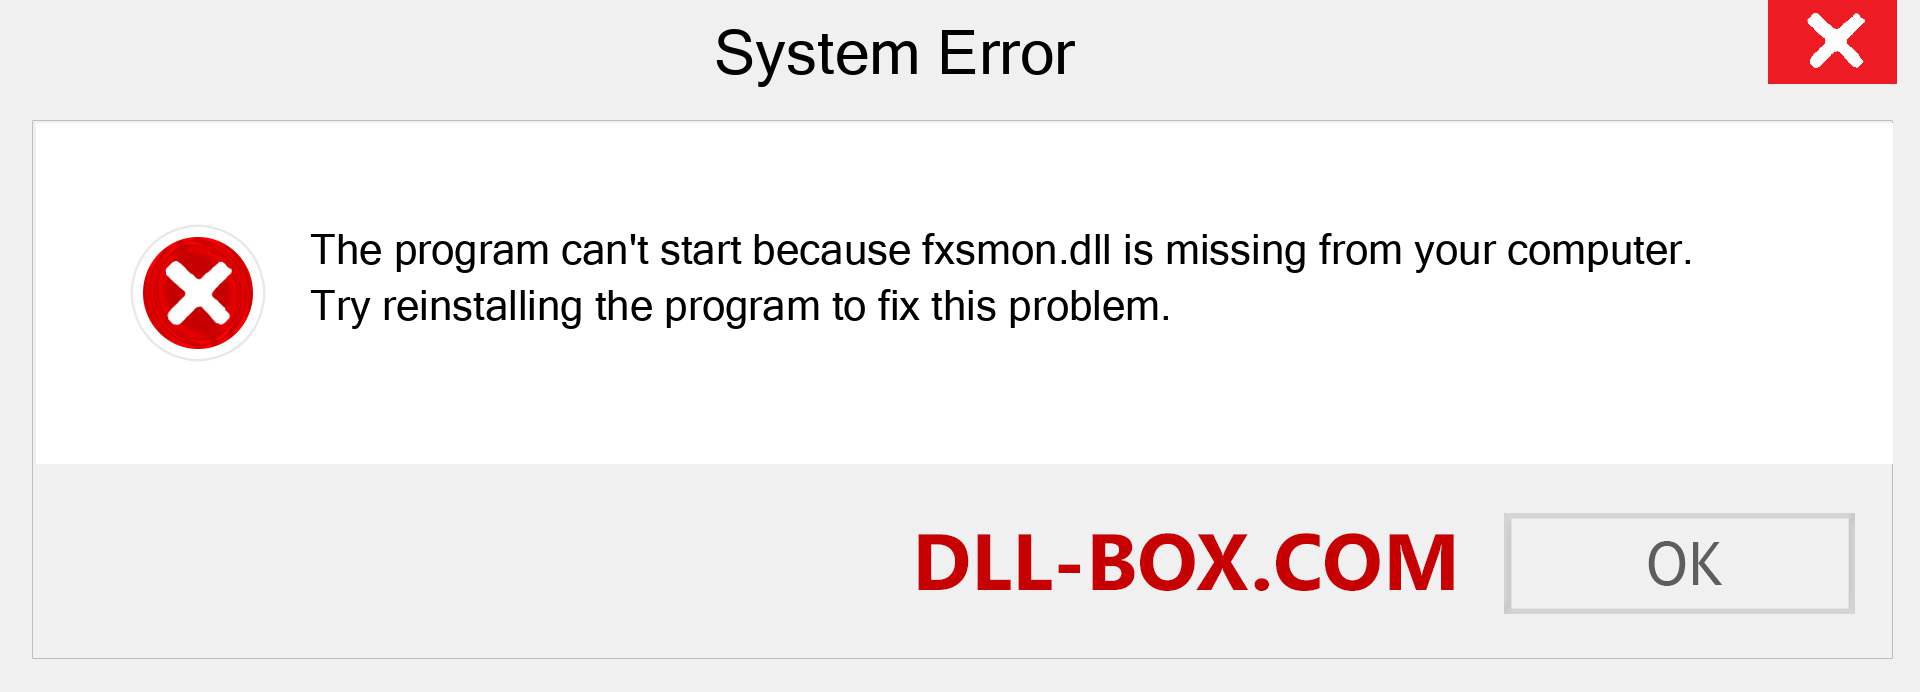  fxsmon.dll file is missing?. Download for Windows 7, 8, 10 - Fix  fxsmon dll Missing Error on Windows, photos, images